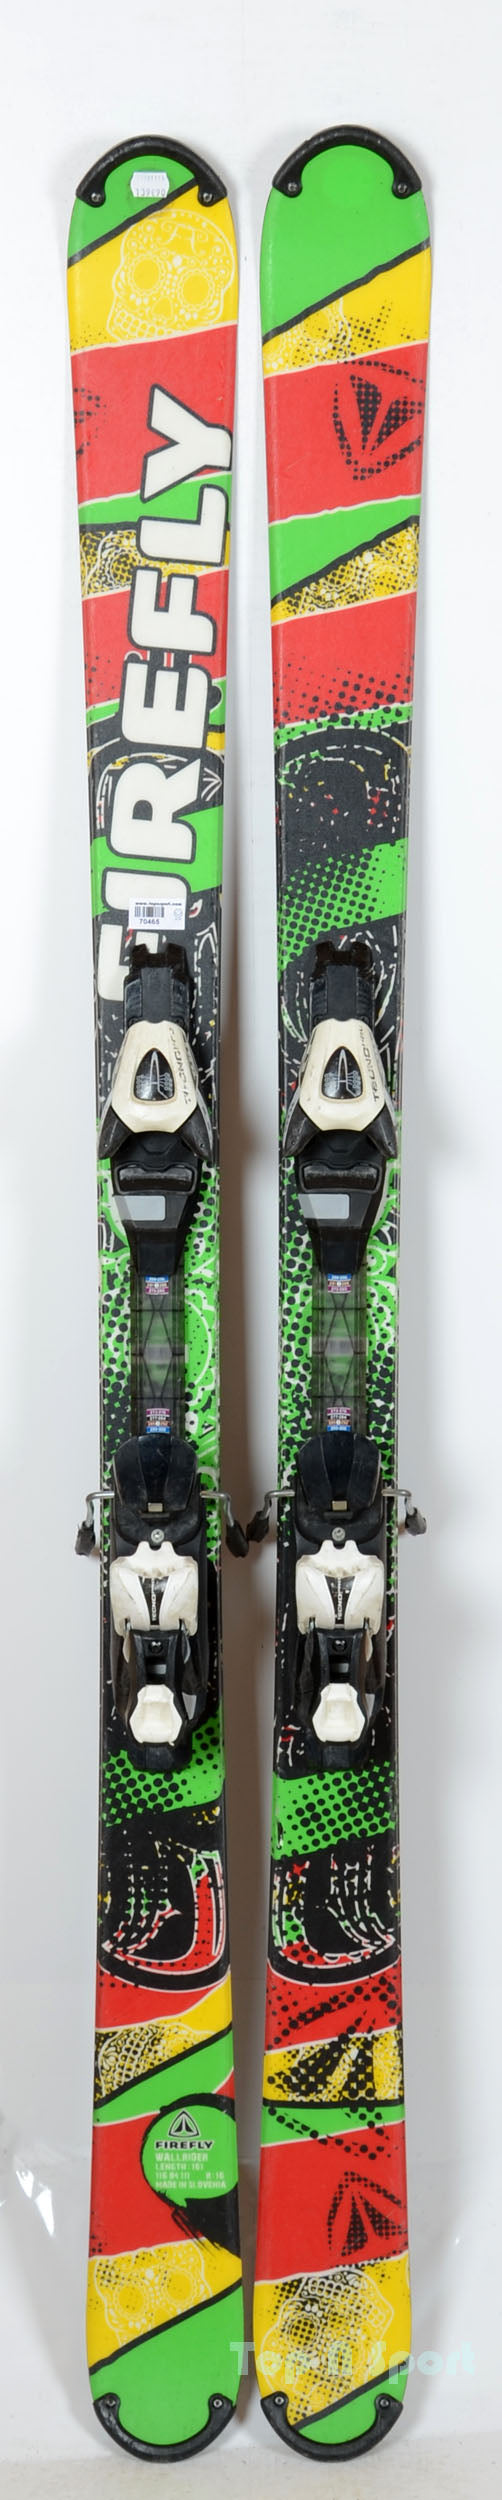 Firefly Wallrider - skis d'occasion